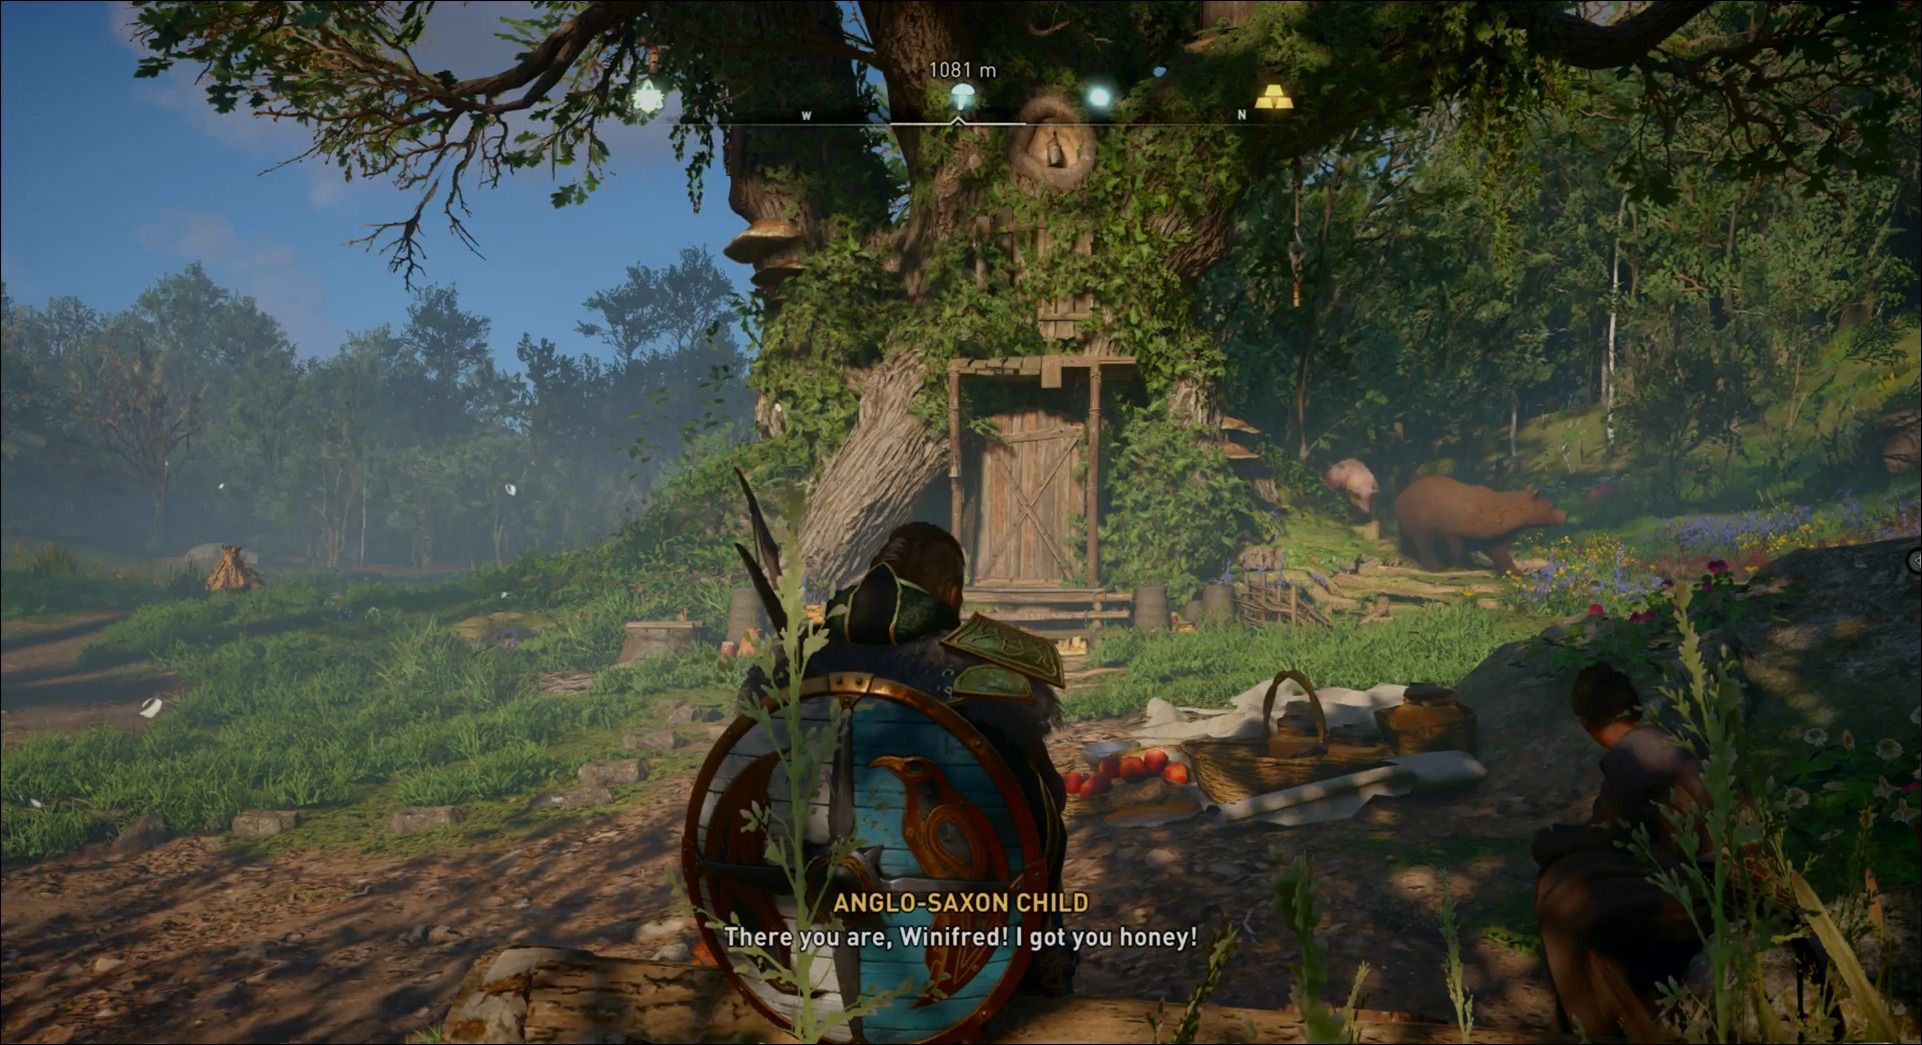 Assassin's Creed Valhalla Winnie the Pooh reference